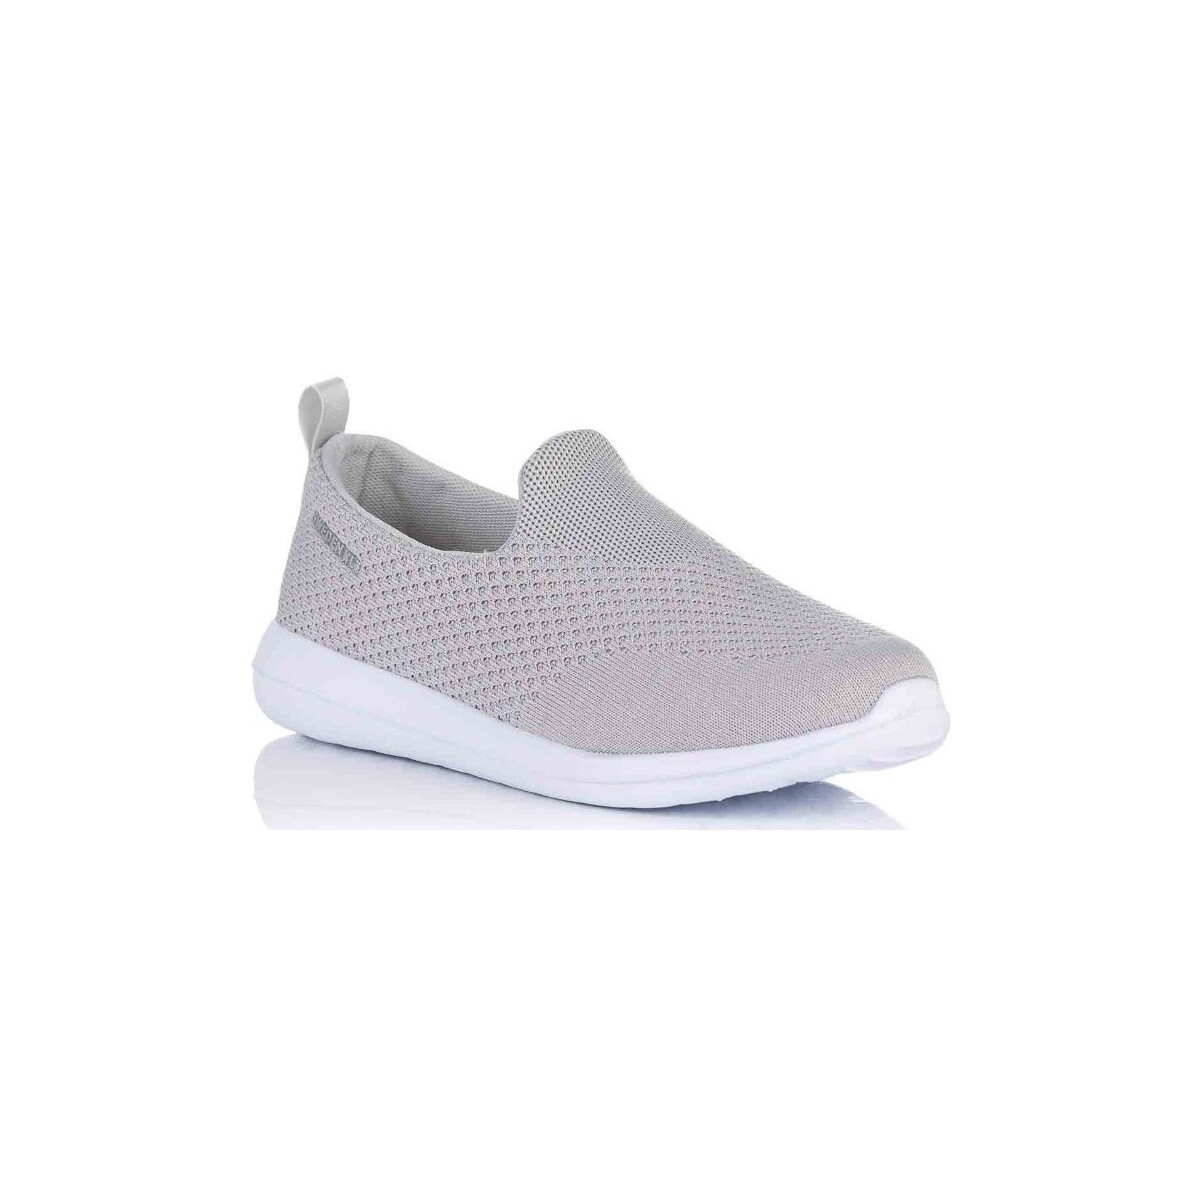 Zapatos Mujer Slip on Sweden Kle 251301 Gris